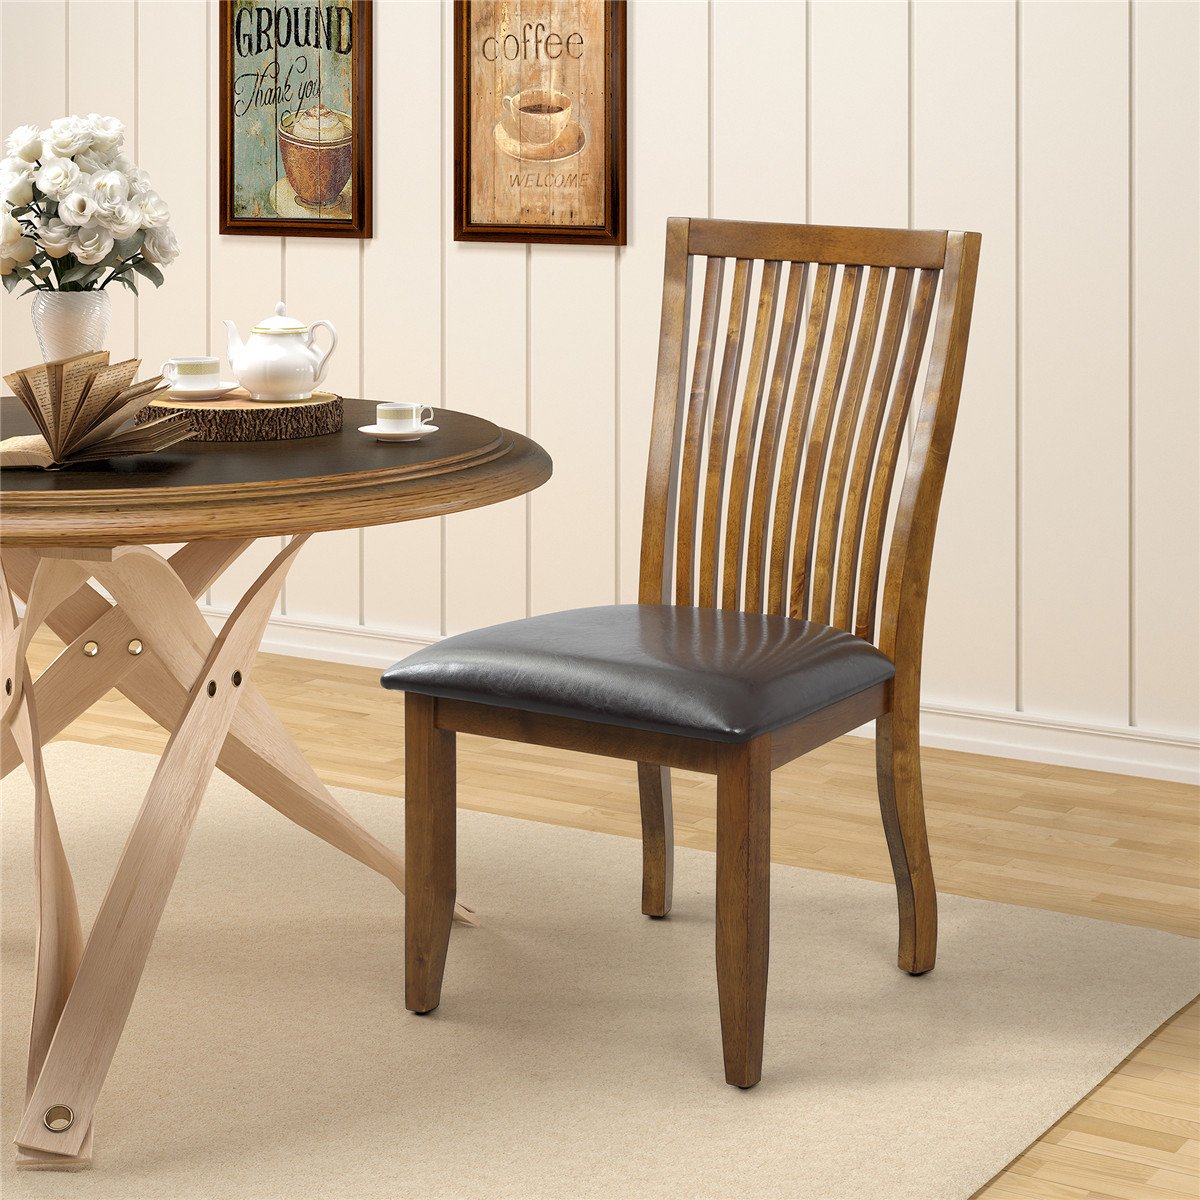 Dining Chair, Wood Cushion Chair, Rustic Chair, Solid Wood and Leather Chair,  Oak Chair, Wooden Chair. 